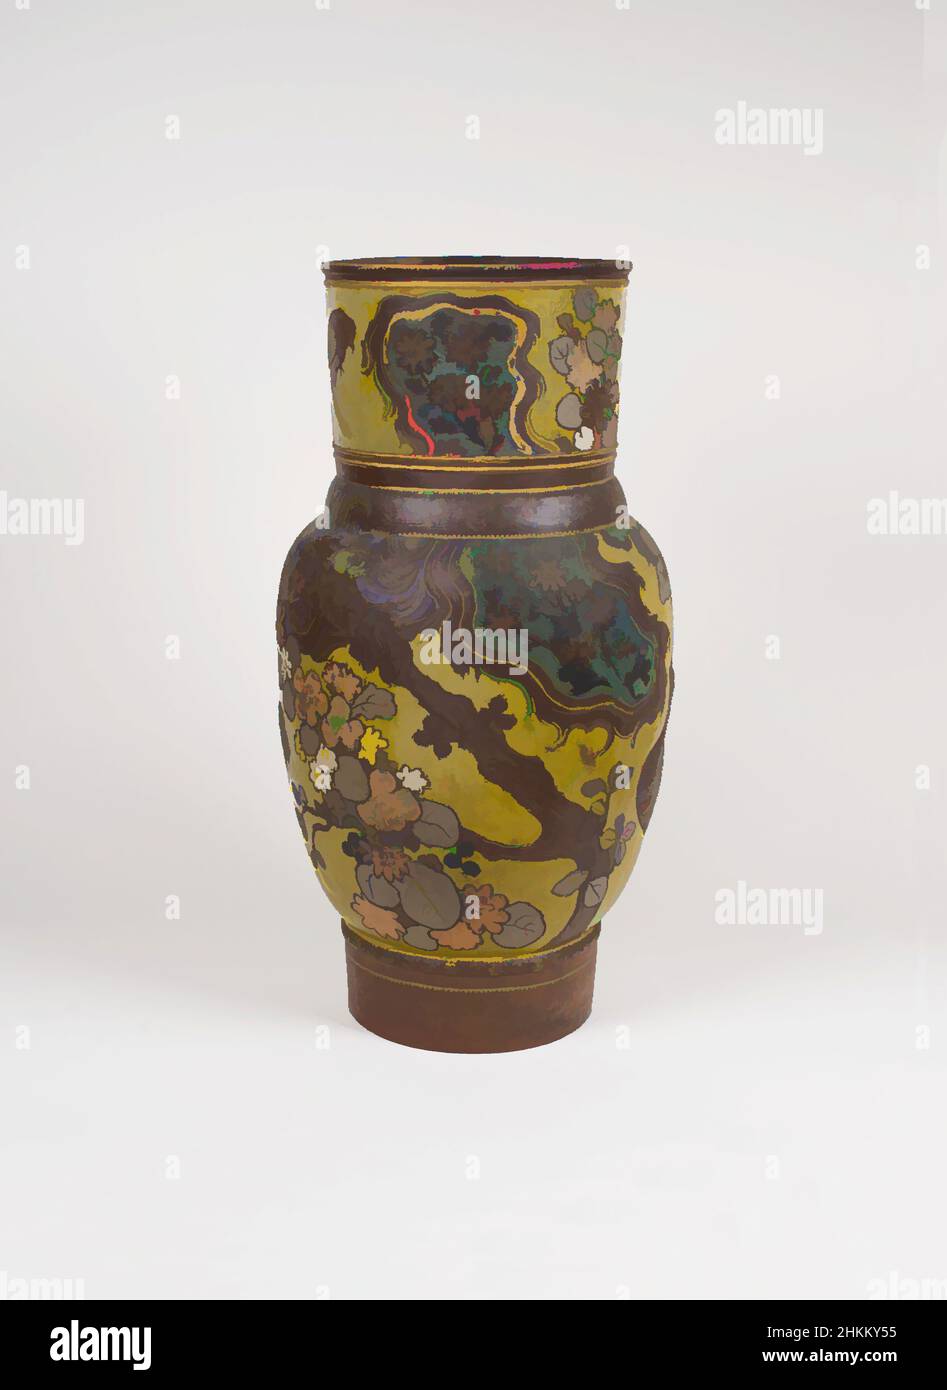 Art inspired by Vase, Ernest Chaplet, French, 1835-1909, Haviland and Company, American and French, 1864-1931, 1882-85, Stoneware with matte glaze and gilding, Made in France, Europe, Ceramics, containers, 27 1/2 x 14 in. (69.9 x 35.6 cm, Classic works modernized by Artotop with a splash of modernity. Shapes, color and value, eye-catching visual impact on art. Emotions through freedom of artworks in a contemporary way. A timeless message pursuing a wildly creative new direction. Artists turning to the digital medium and creating the Artotop NFT Stock Photo